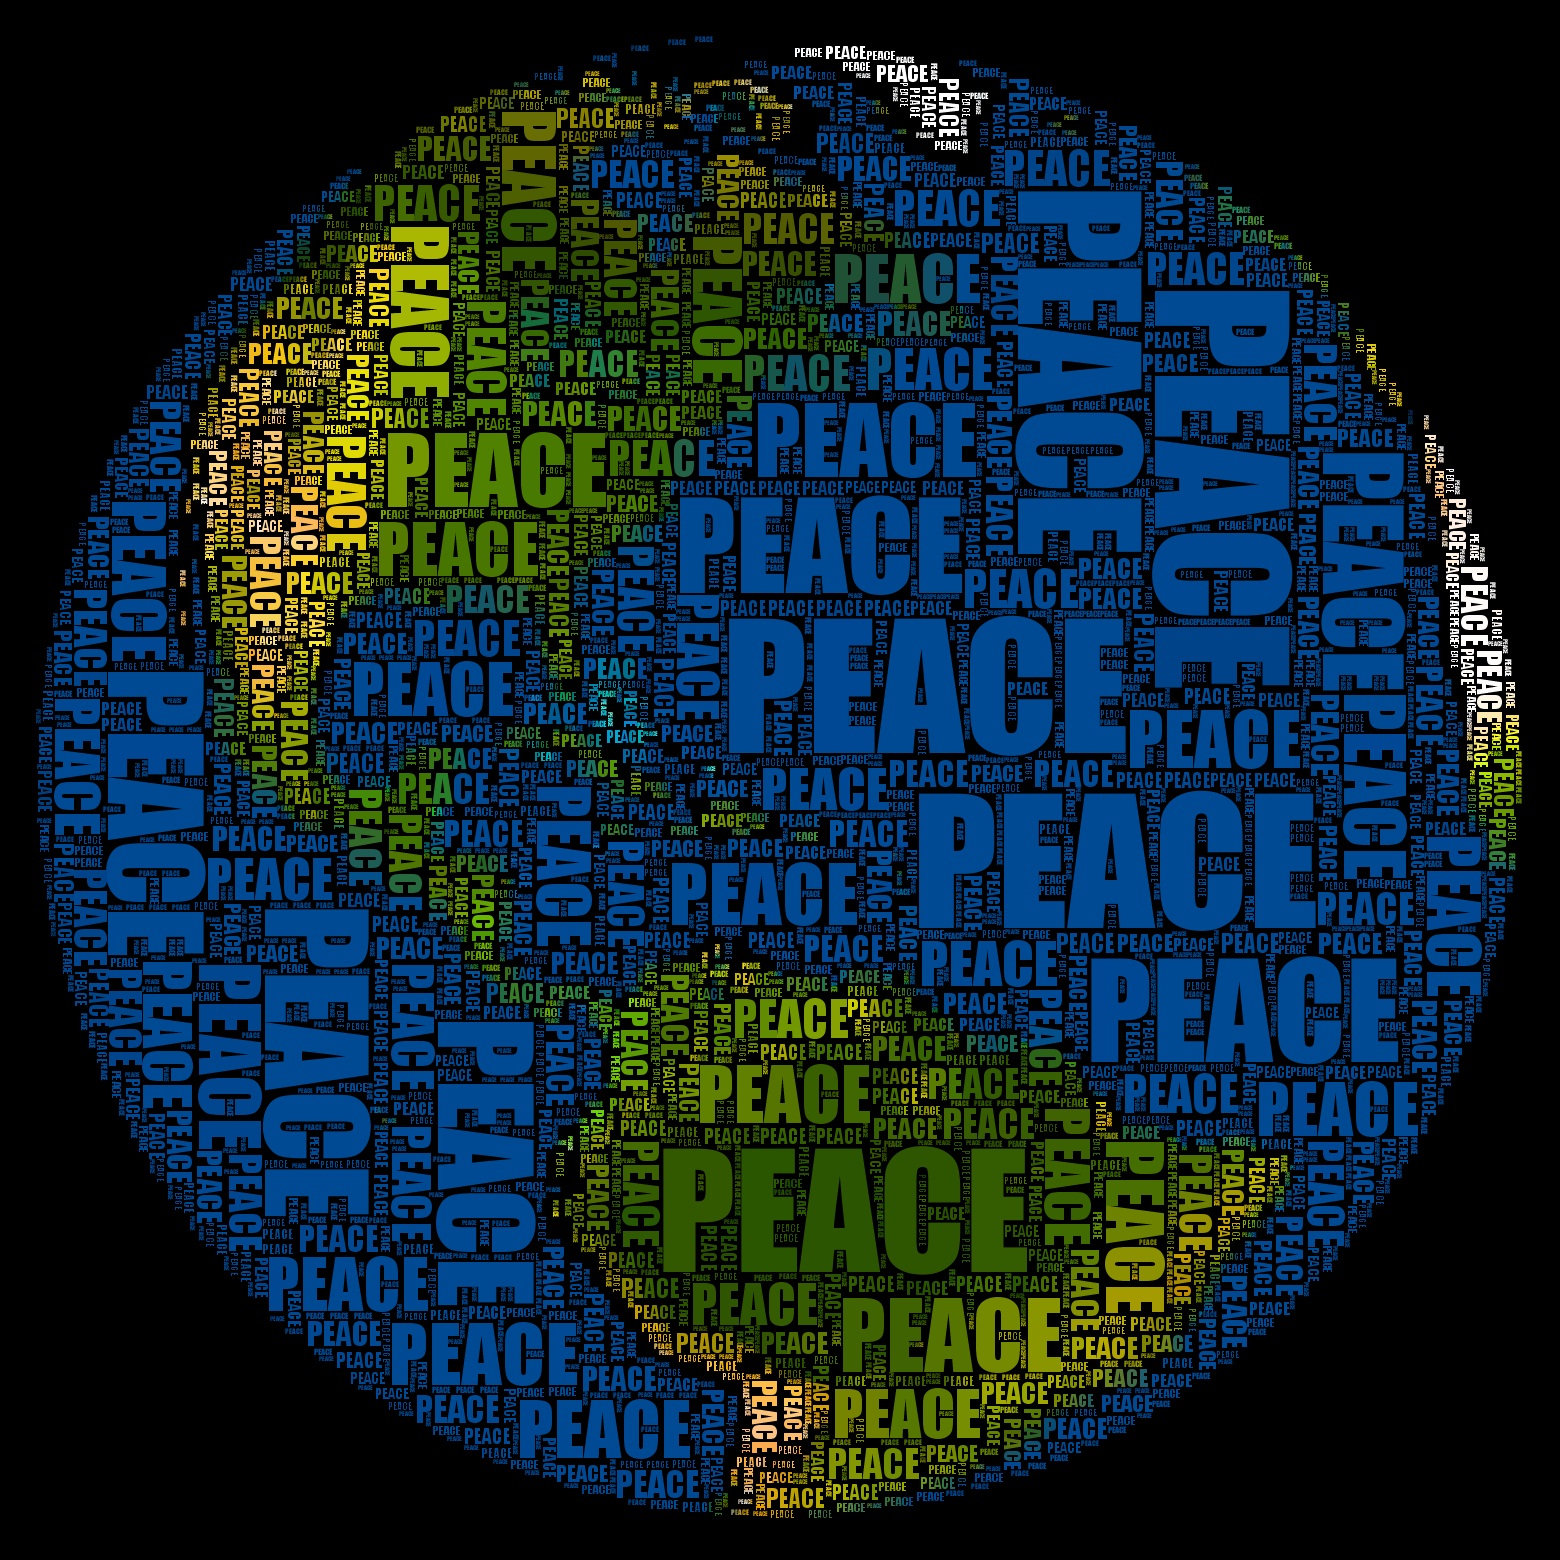 WORLD PEACE - WHAT WE SHOULD ALL ASK FOR